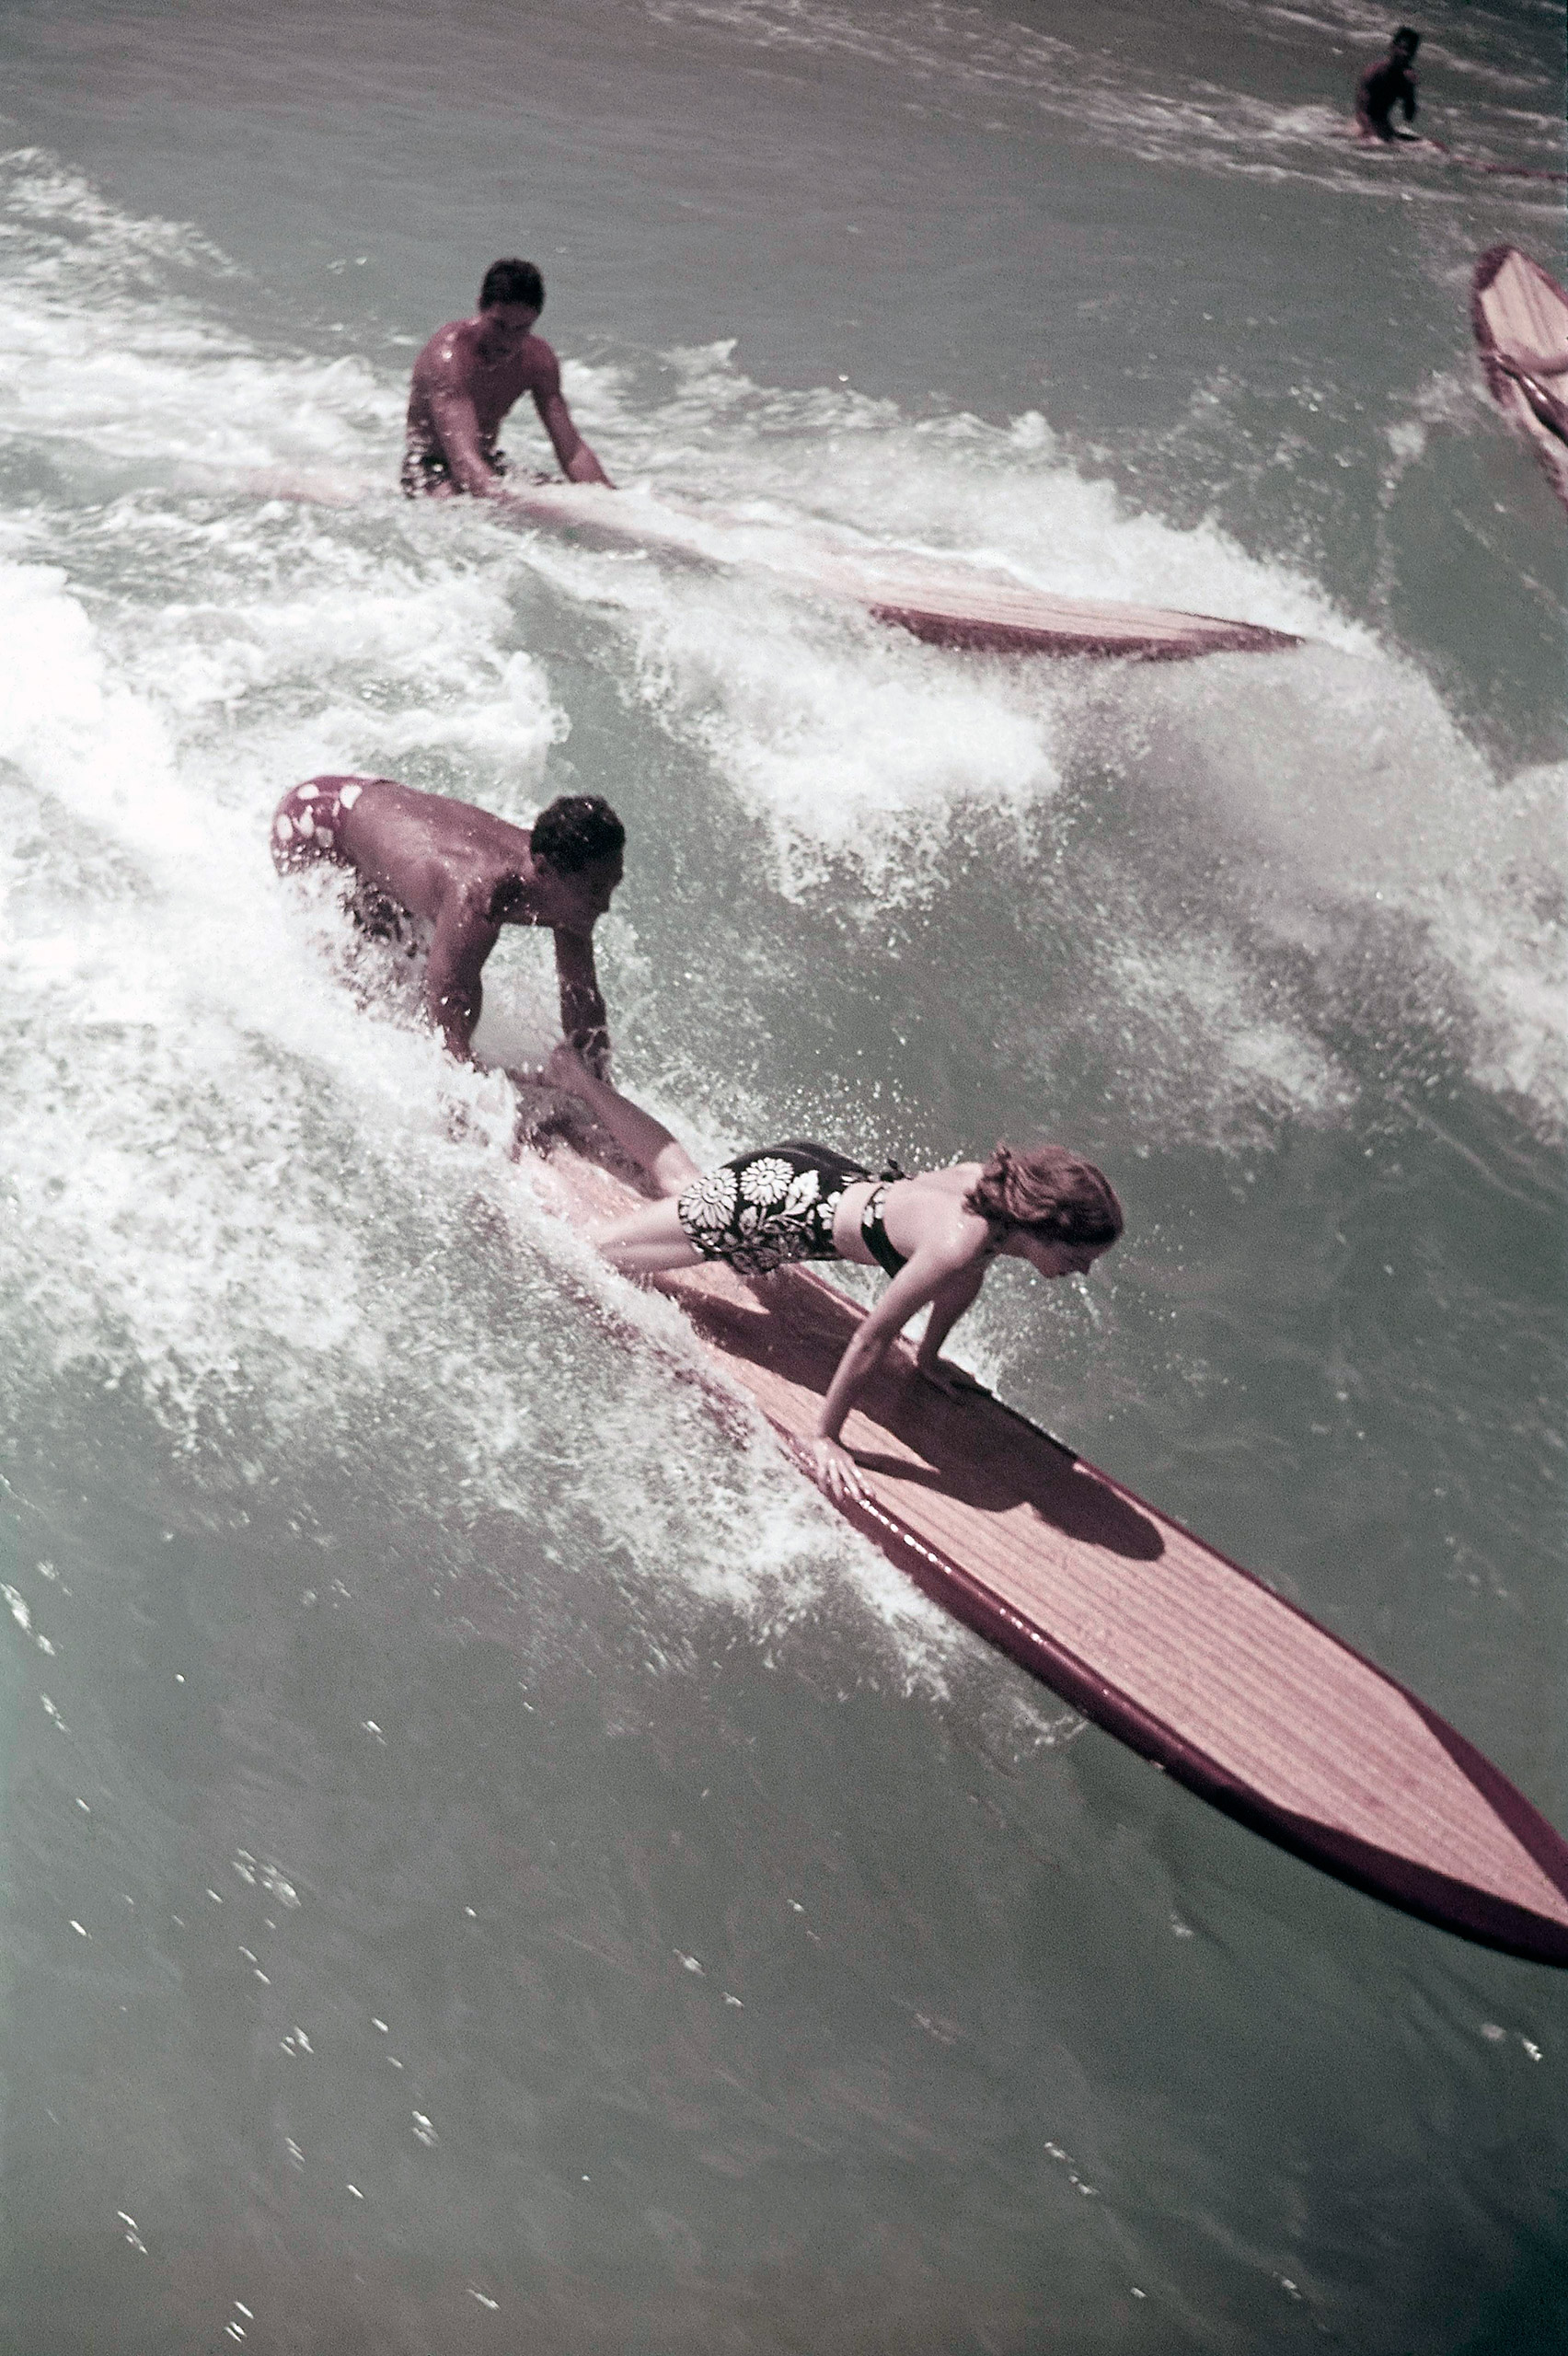 Surfers in the water in Hawaii, 1938.